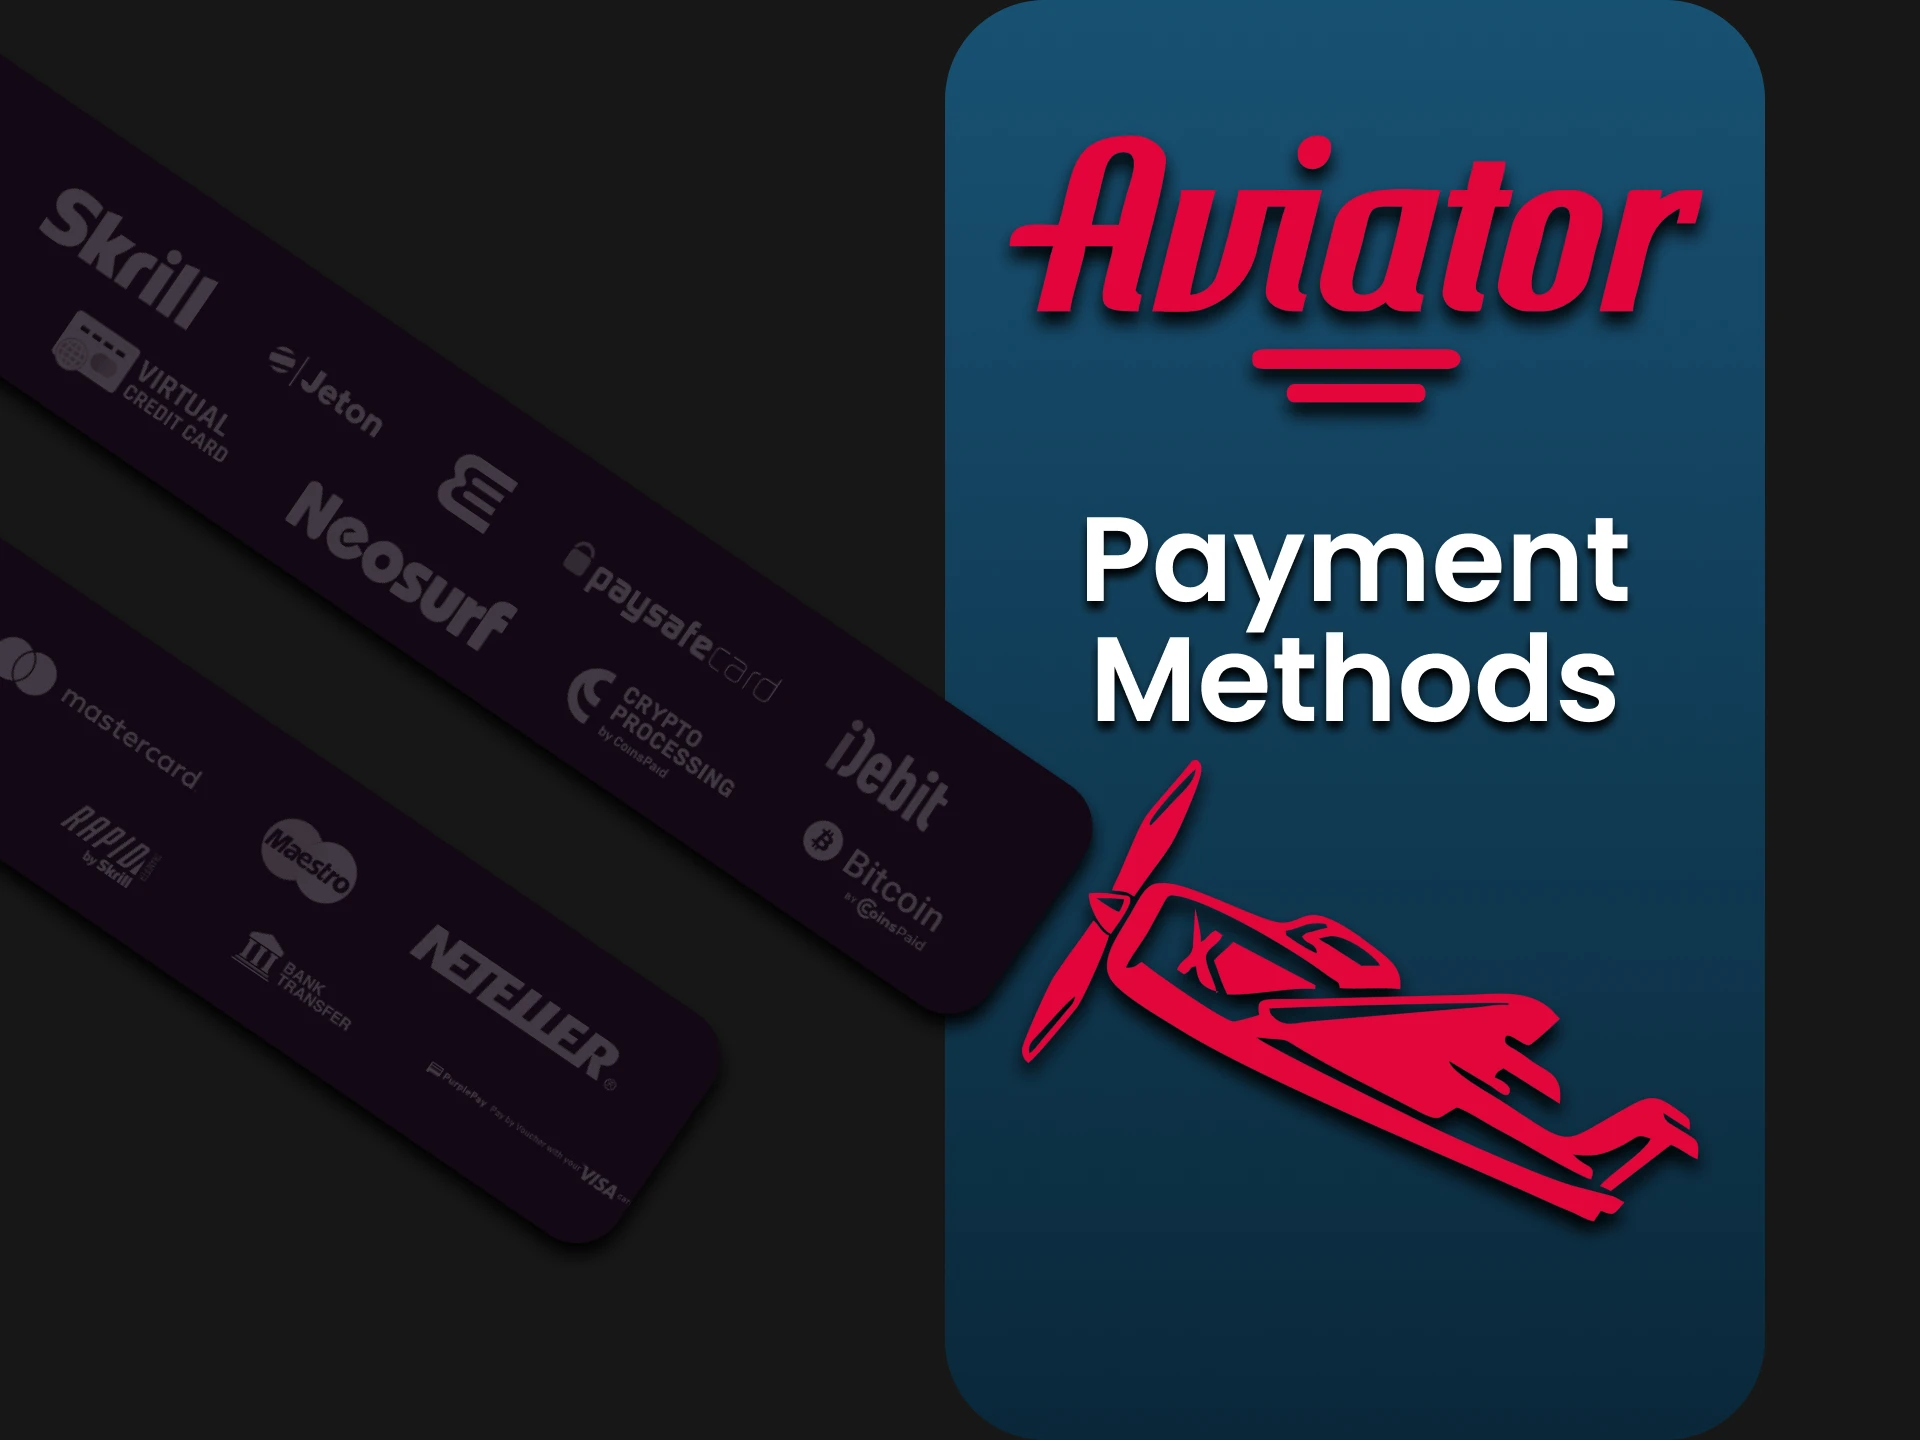 We will tell you about the transaction methods for Aviator.